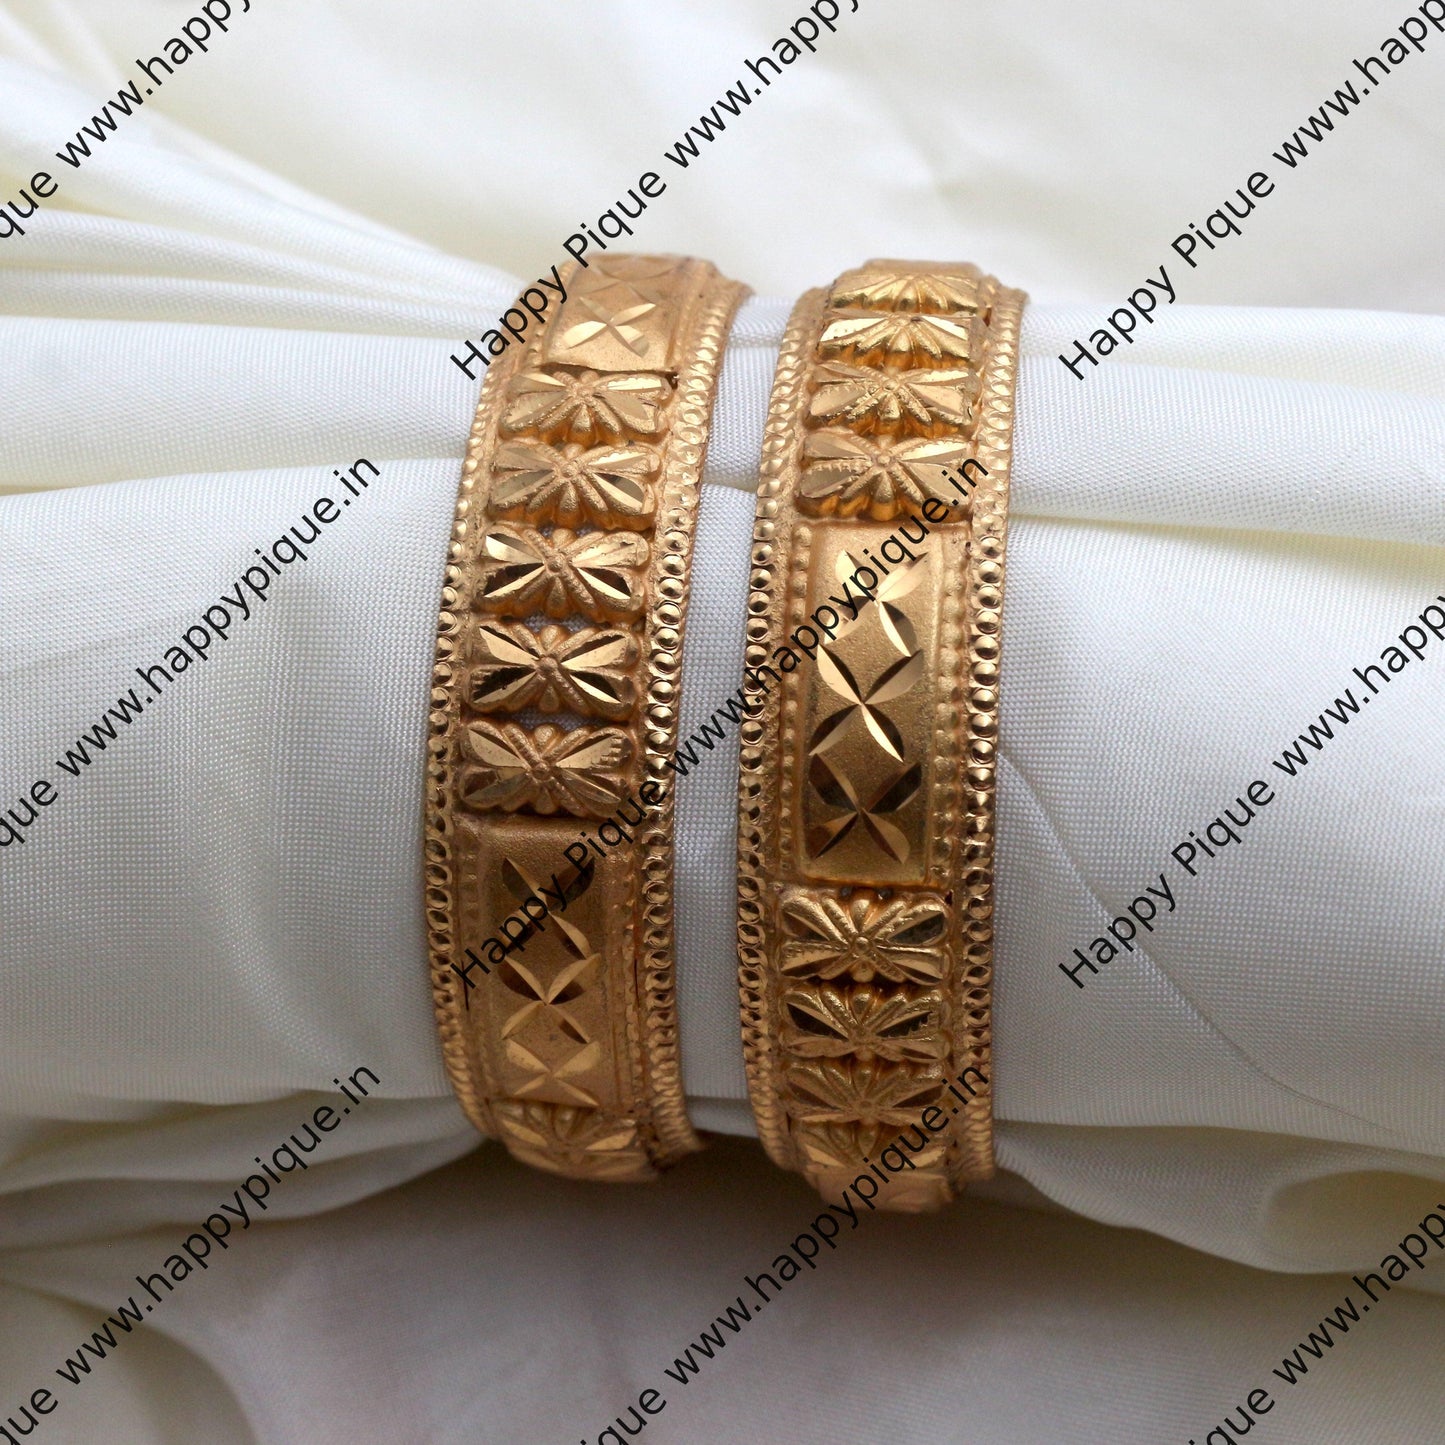 Real Gold Tone Thick Bangles - SS003 - Daily Wear/Office Wear/Function Wear Bangles